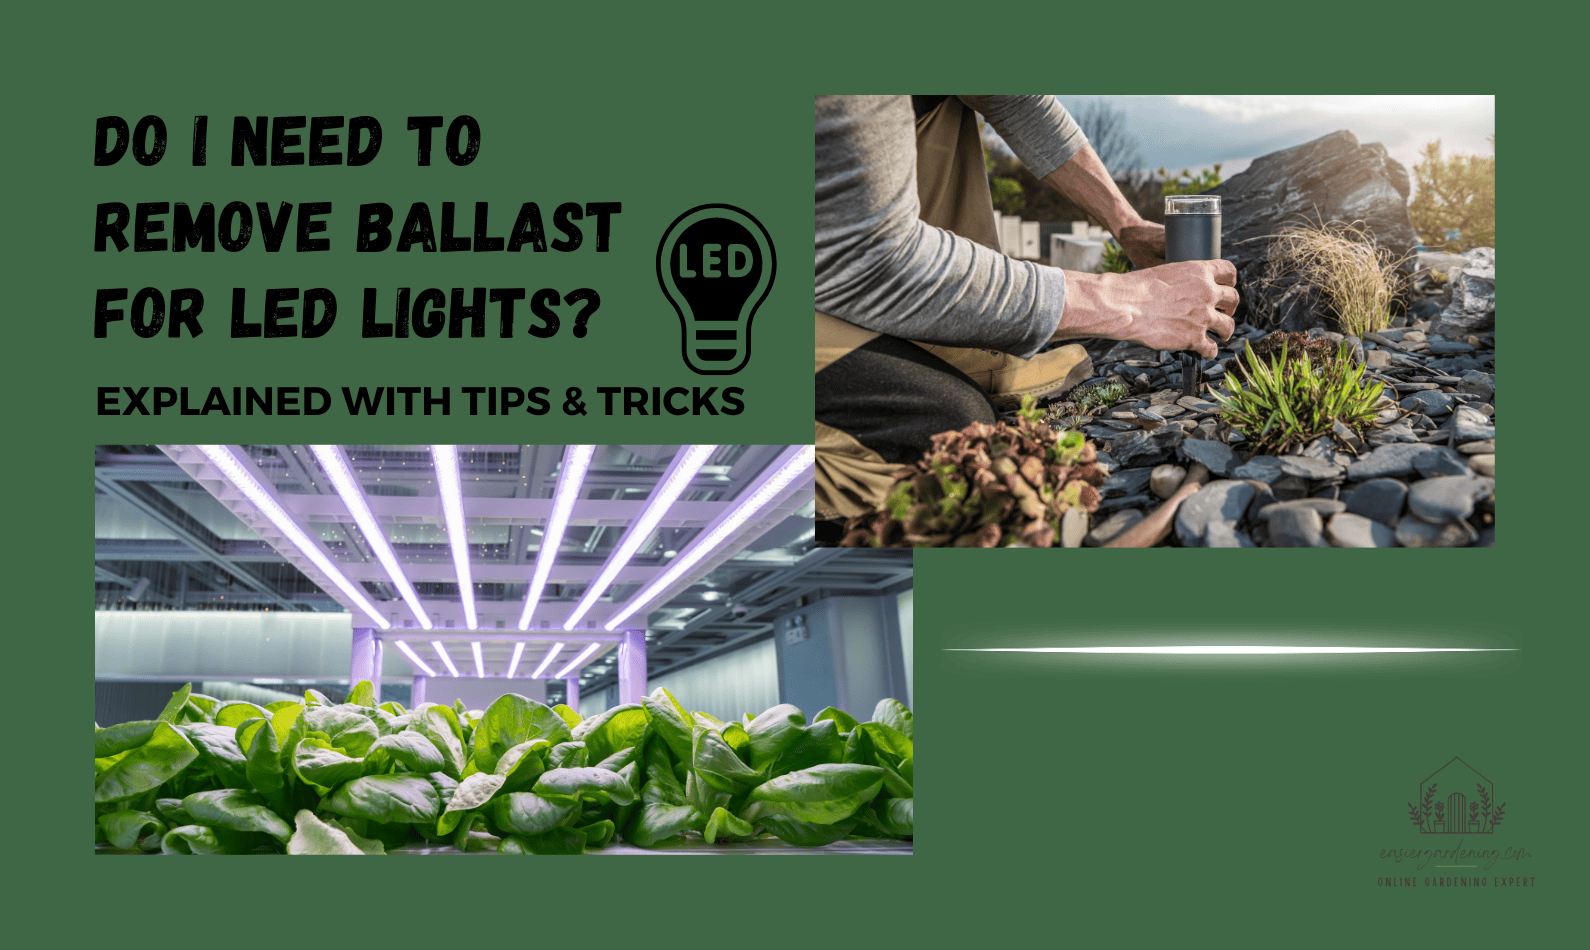 Do I Need to Remove Ballast For Led Lights?